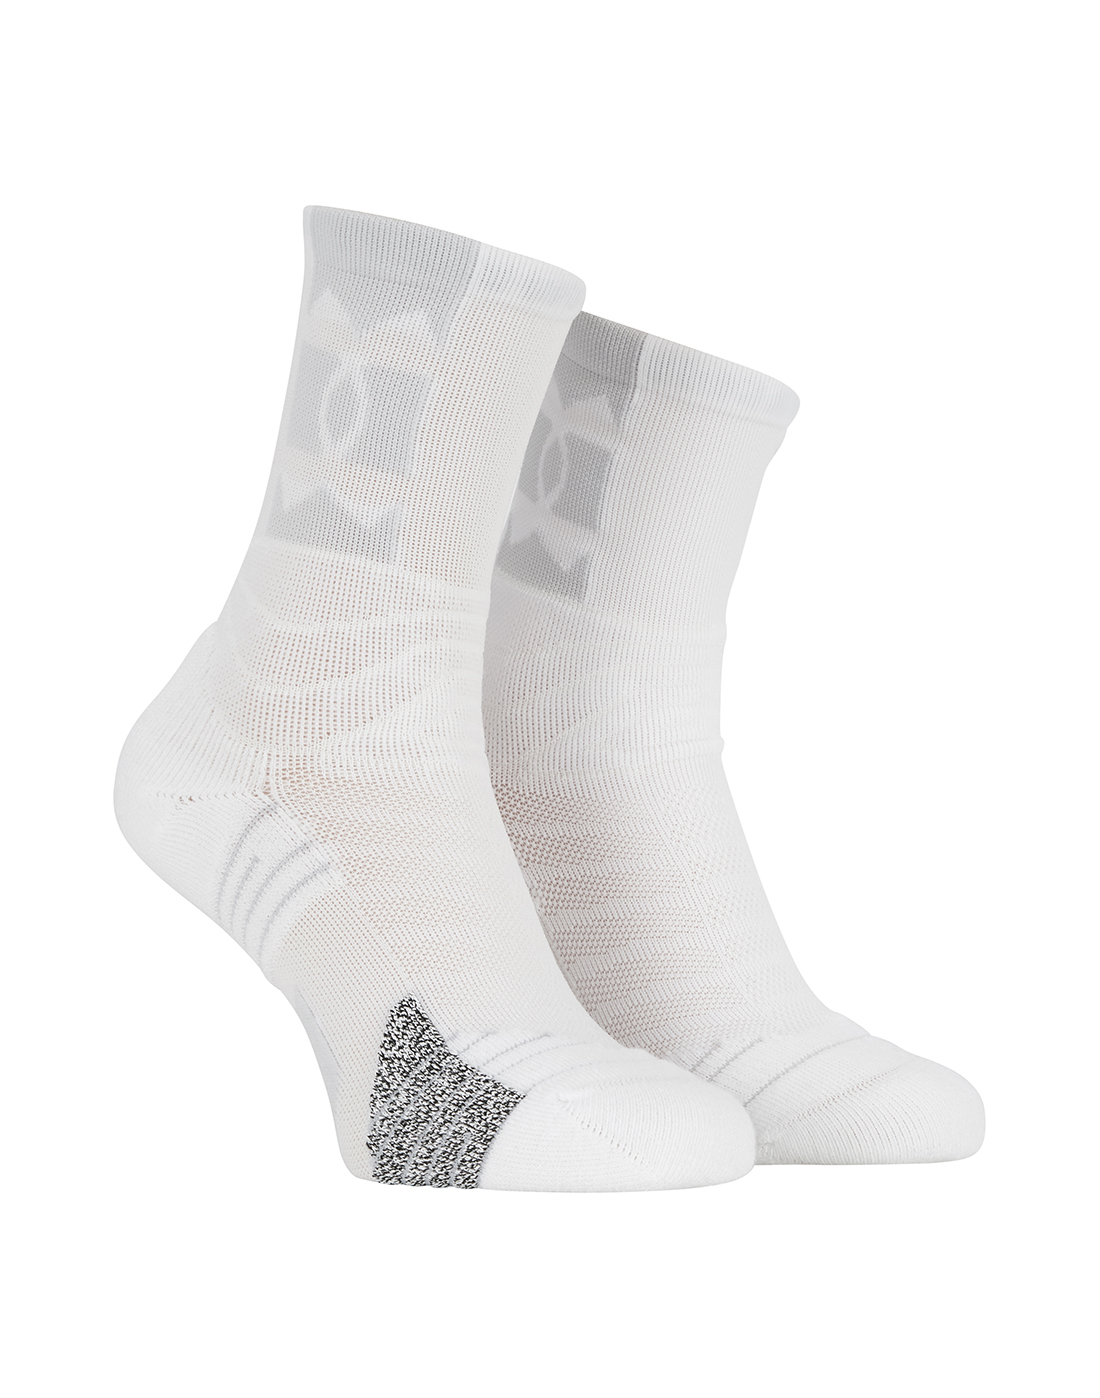 Under Armour Playmaker Crew Socks - White | Life Style Sports IE